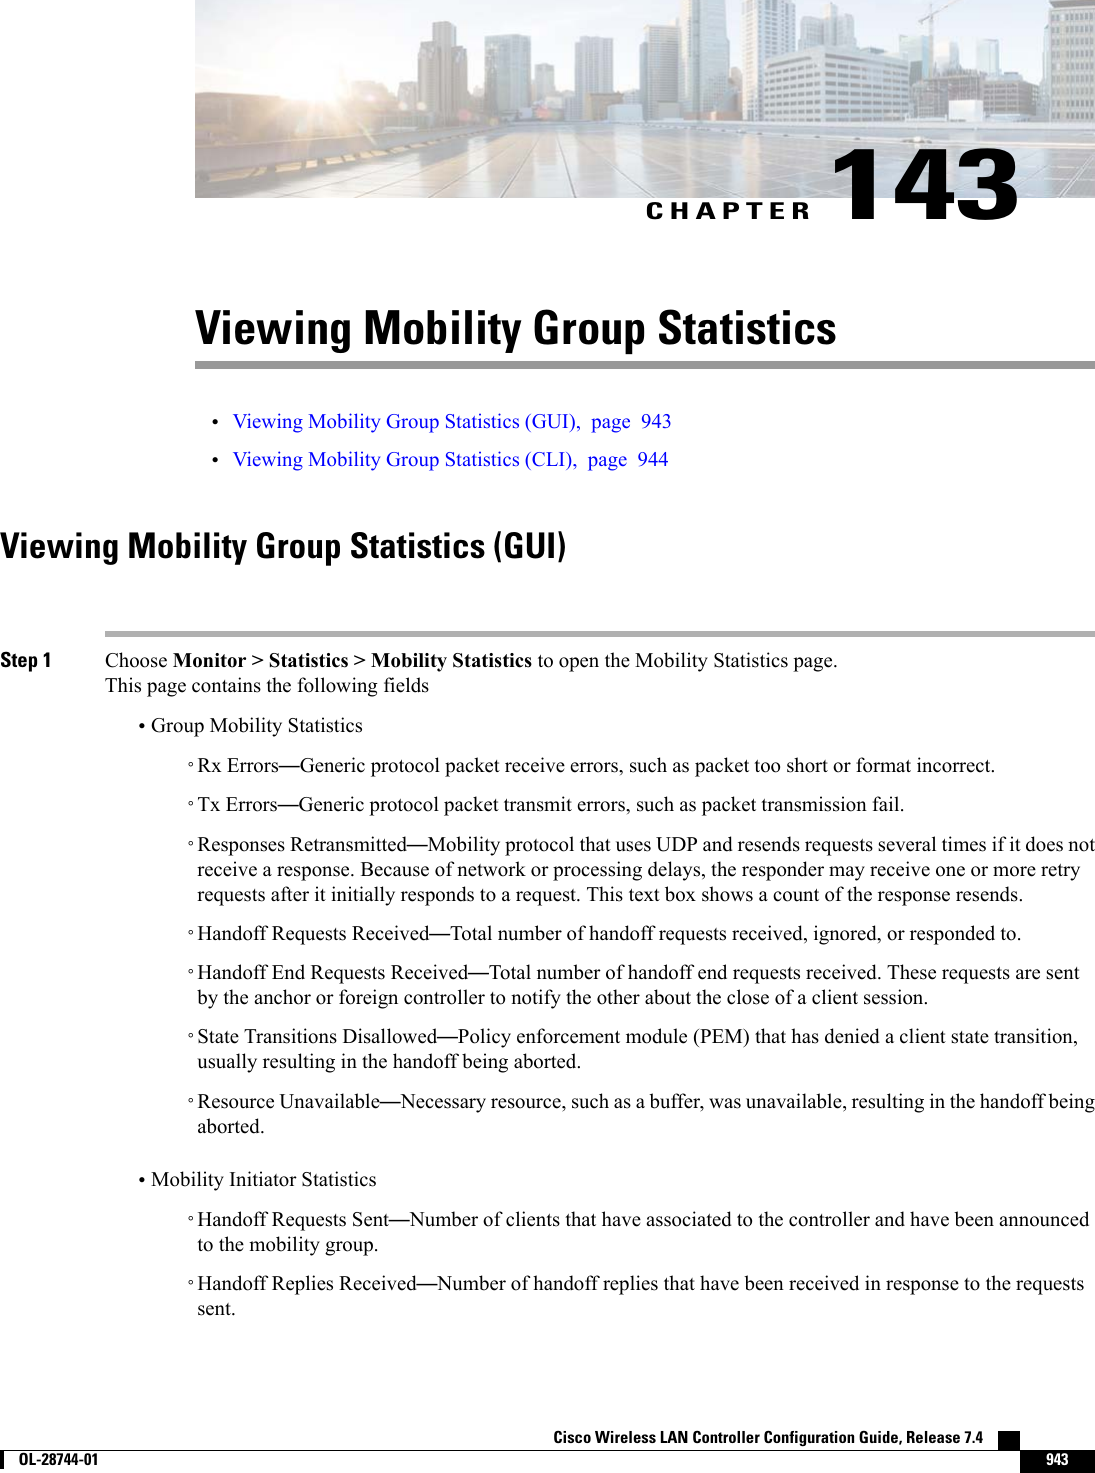 CHAPTER 143Viewing Mobility Group Statistics•Viewing Mobility Group Statistics (GUI), page 943•Viewing Mobility Group Statistics (CLI), page 944Viewing Mobility Group Statistics (GUI)Step 1 Choose Monitor &gt; Statistics &gt; Mobility Statistics to open the Mobility Statistics page.This page contains the following fields•Group Mobility Statistics◦Rx Errors—Generic protocol packet receive errors, such as packet too short or format incorrect.◦Tx Errors—Generic protocol packet transmit errors, such as packet transmission fail.◦Responses Retransmitted—Mobility protocol that uses UDP and resends requests several times if it does notreceive a response. Because of network or processing delays, the responder may receive one or more retryrequests after it initially responds to a request. This text box shows a count of the response resends.◦Handoff Requests Received—Total number of handoff requests received, ignored, or responded to.◦Handoff End Requests Received—Total number of handoff end requests received. These requests are sentby the anchor or foreign controller to notify the other about the close of a client session.◦State Transitions Disallowed—Policy enforcement module (PEM) that has denied a client state transition,usually resulting in the handoff being aborted.◦Resource Unavailable—Necessary resource, such as a buffer, was unavailable, resulting in the handoff beingaborted.•Mobility Initiator Statistics◦Handoff Requests Sent—Number of clients that have associated to the controller and have been announcedto the mobility group.◦Handoff Replies Received—Number of handoff replies that have been received in response to the requestssent.Cisco Wireless LAN Controller Configuration Guide, Release 7.4        OL-28744-01 943